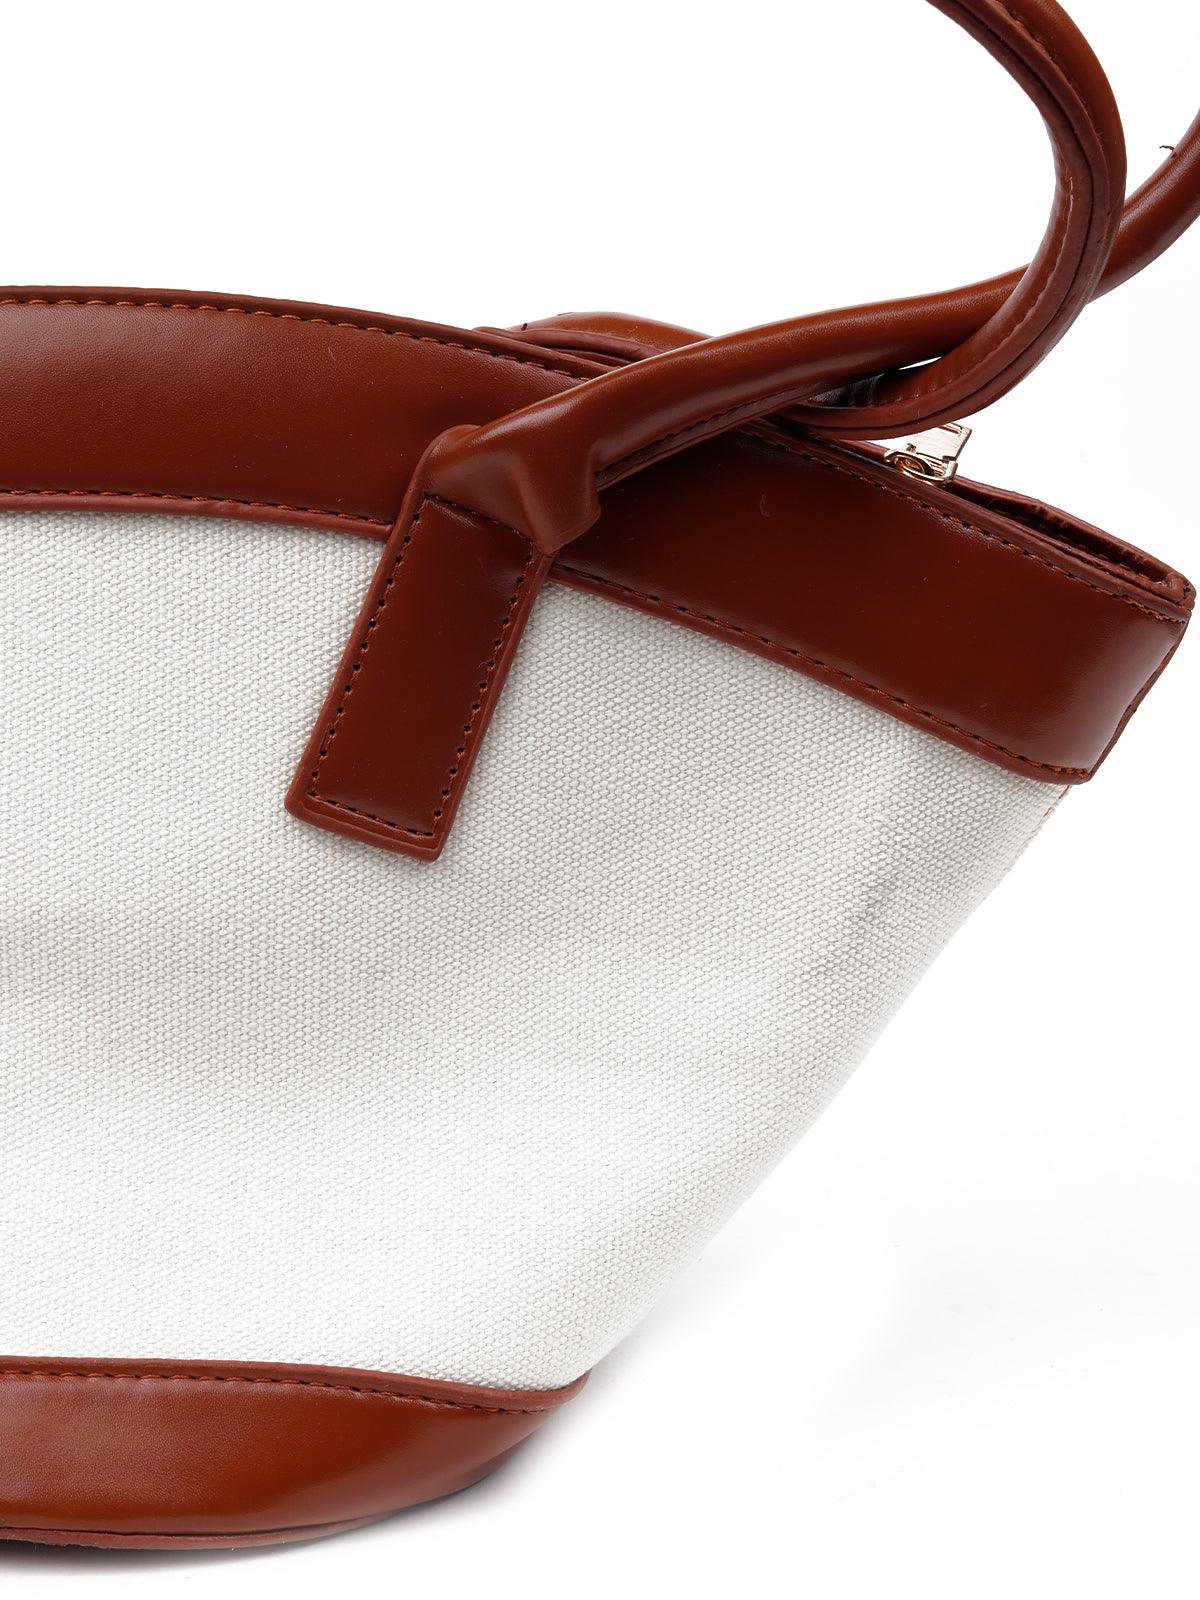 Gorgeous white and brown structured handbag - Odette